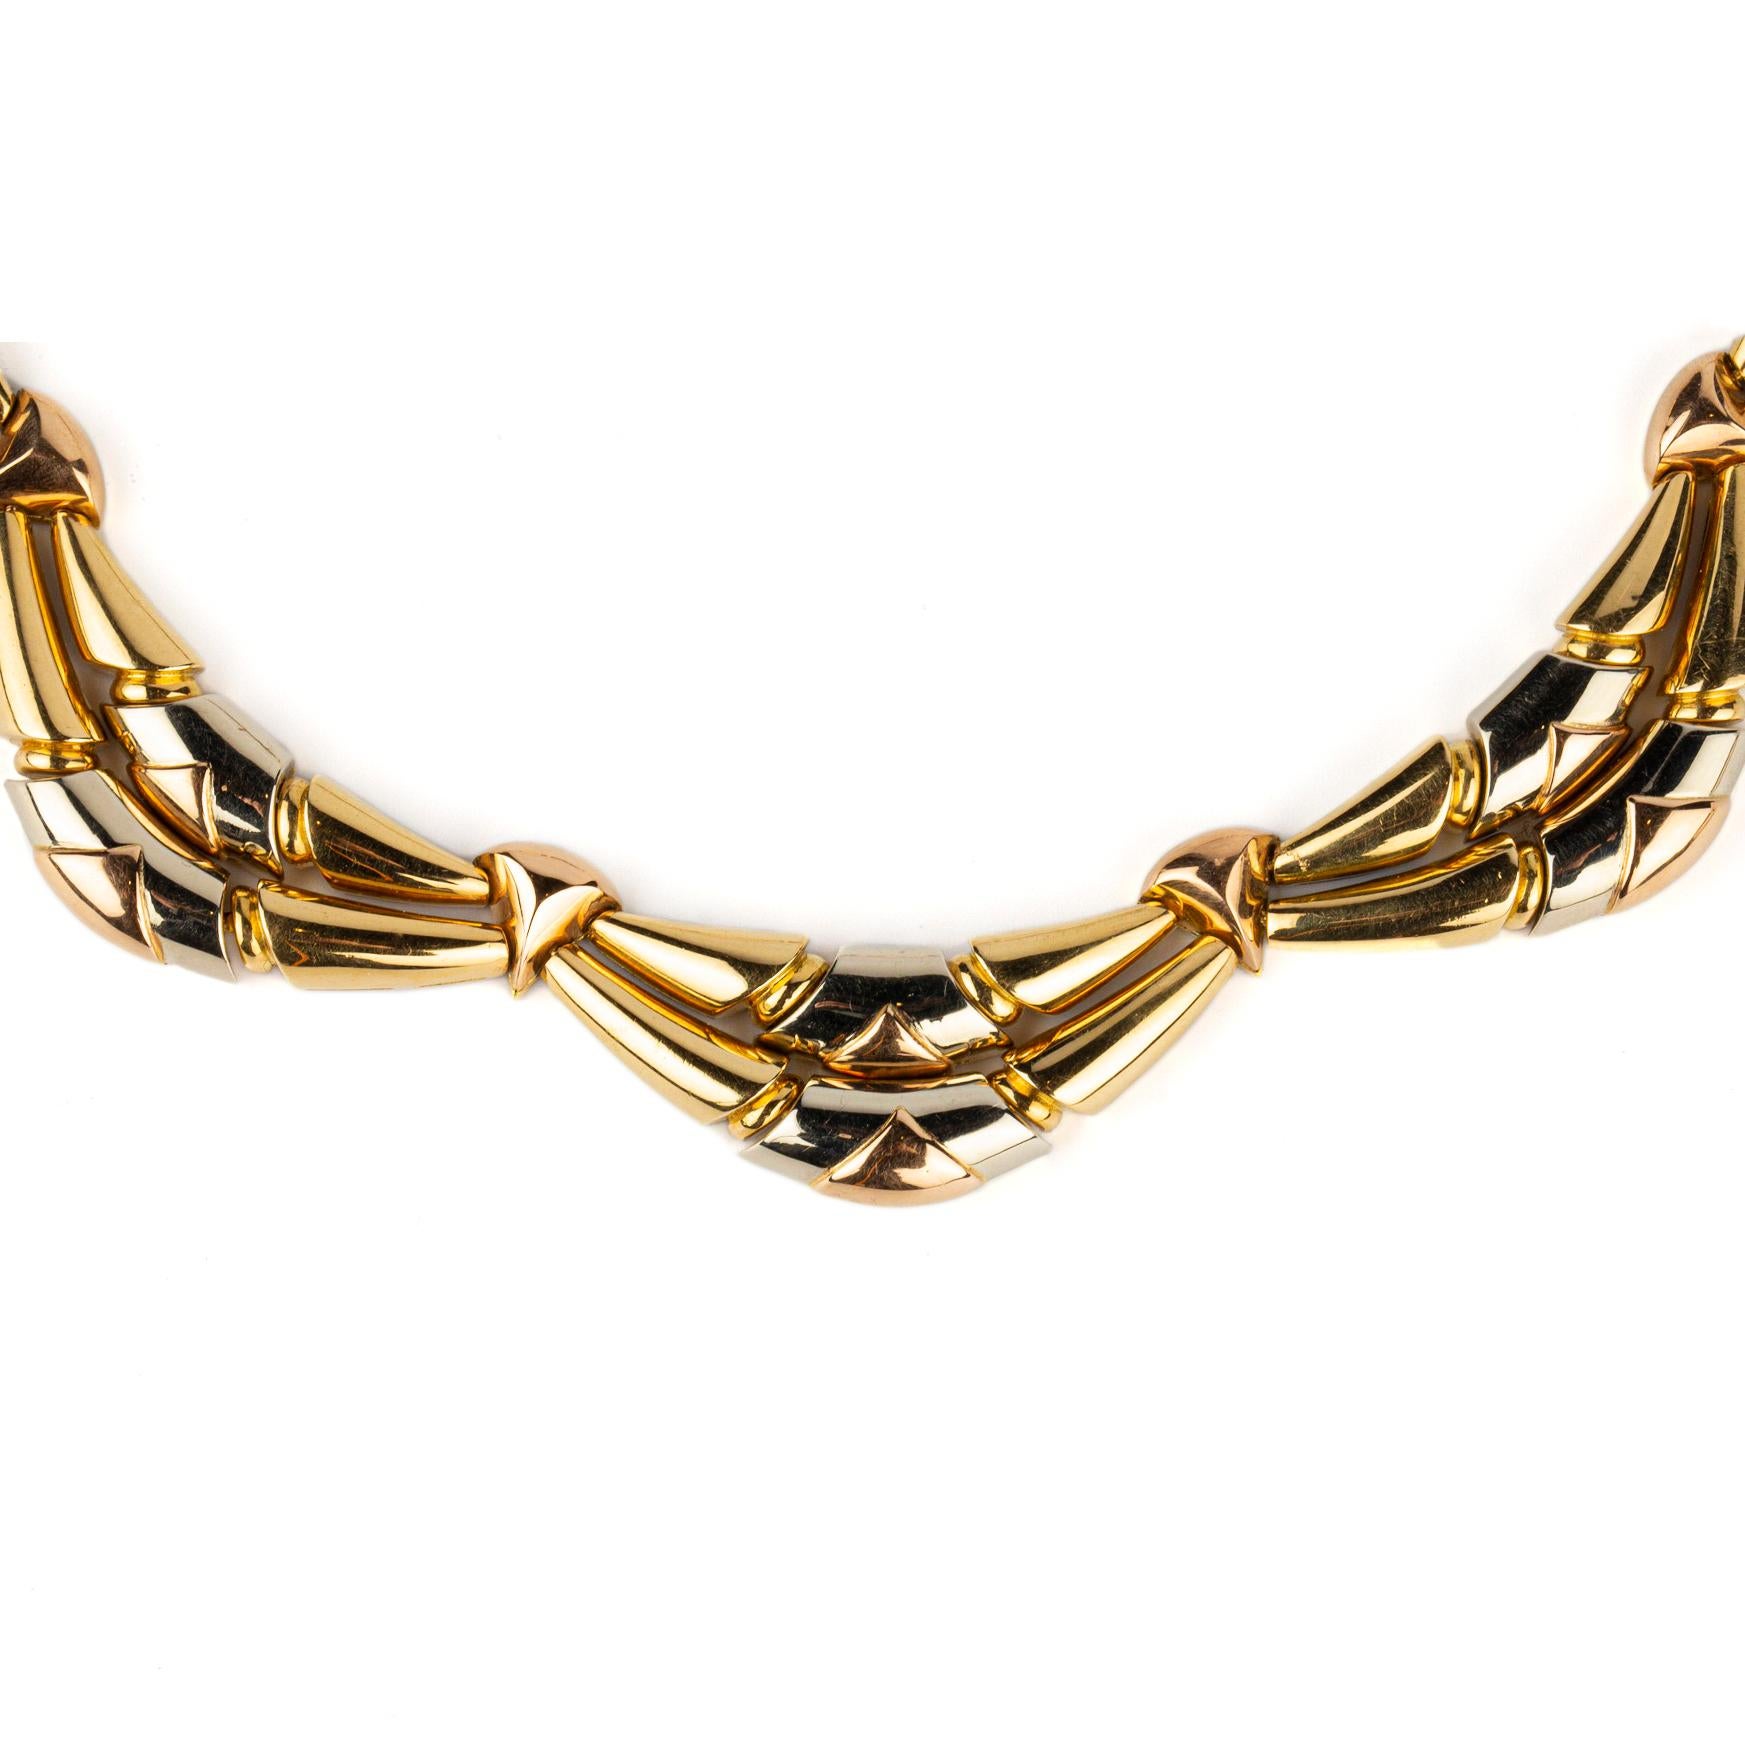 An unusual and articulated necklace in three color 18k gold manufactured by Bulgari. Made in Italy, circa 1980. 